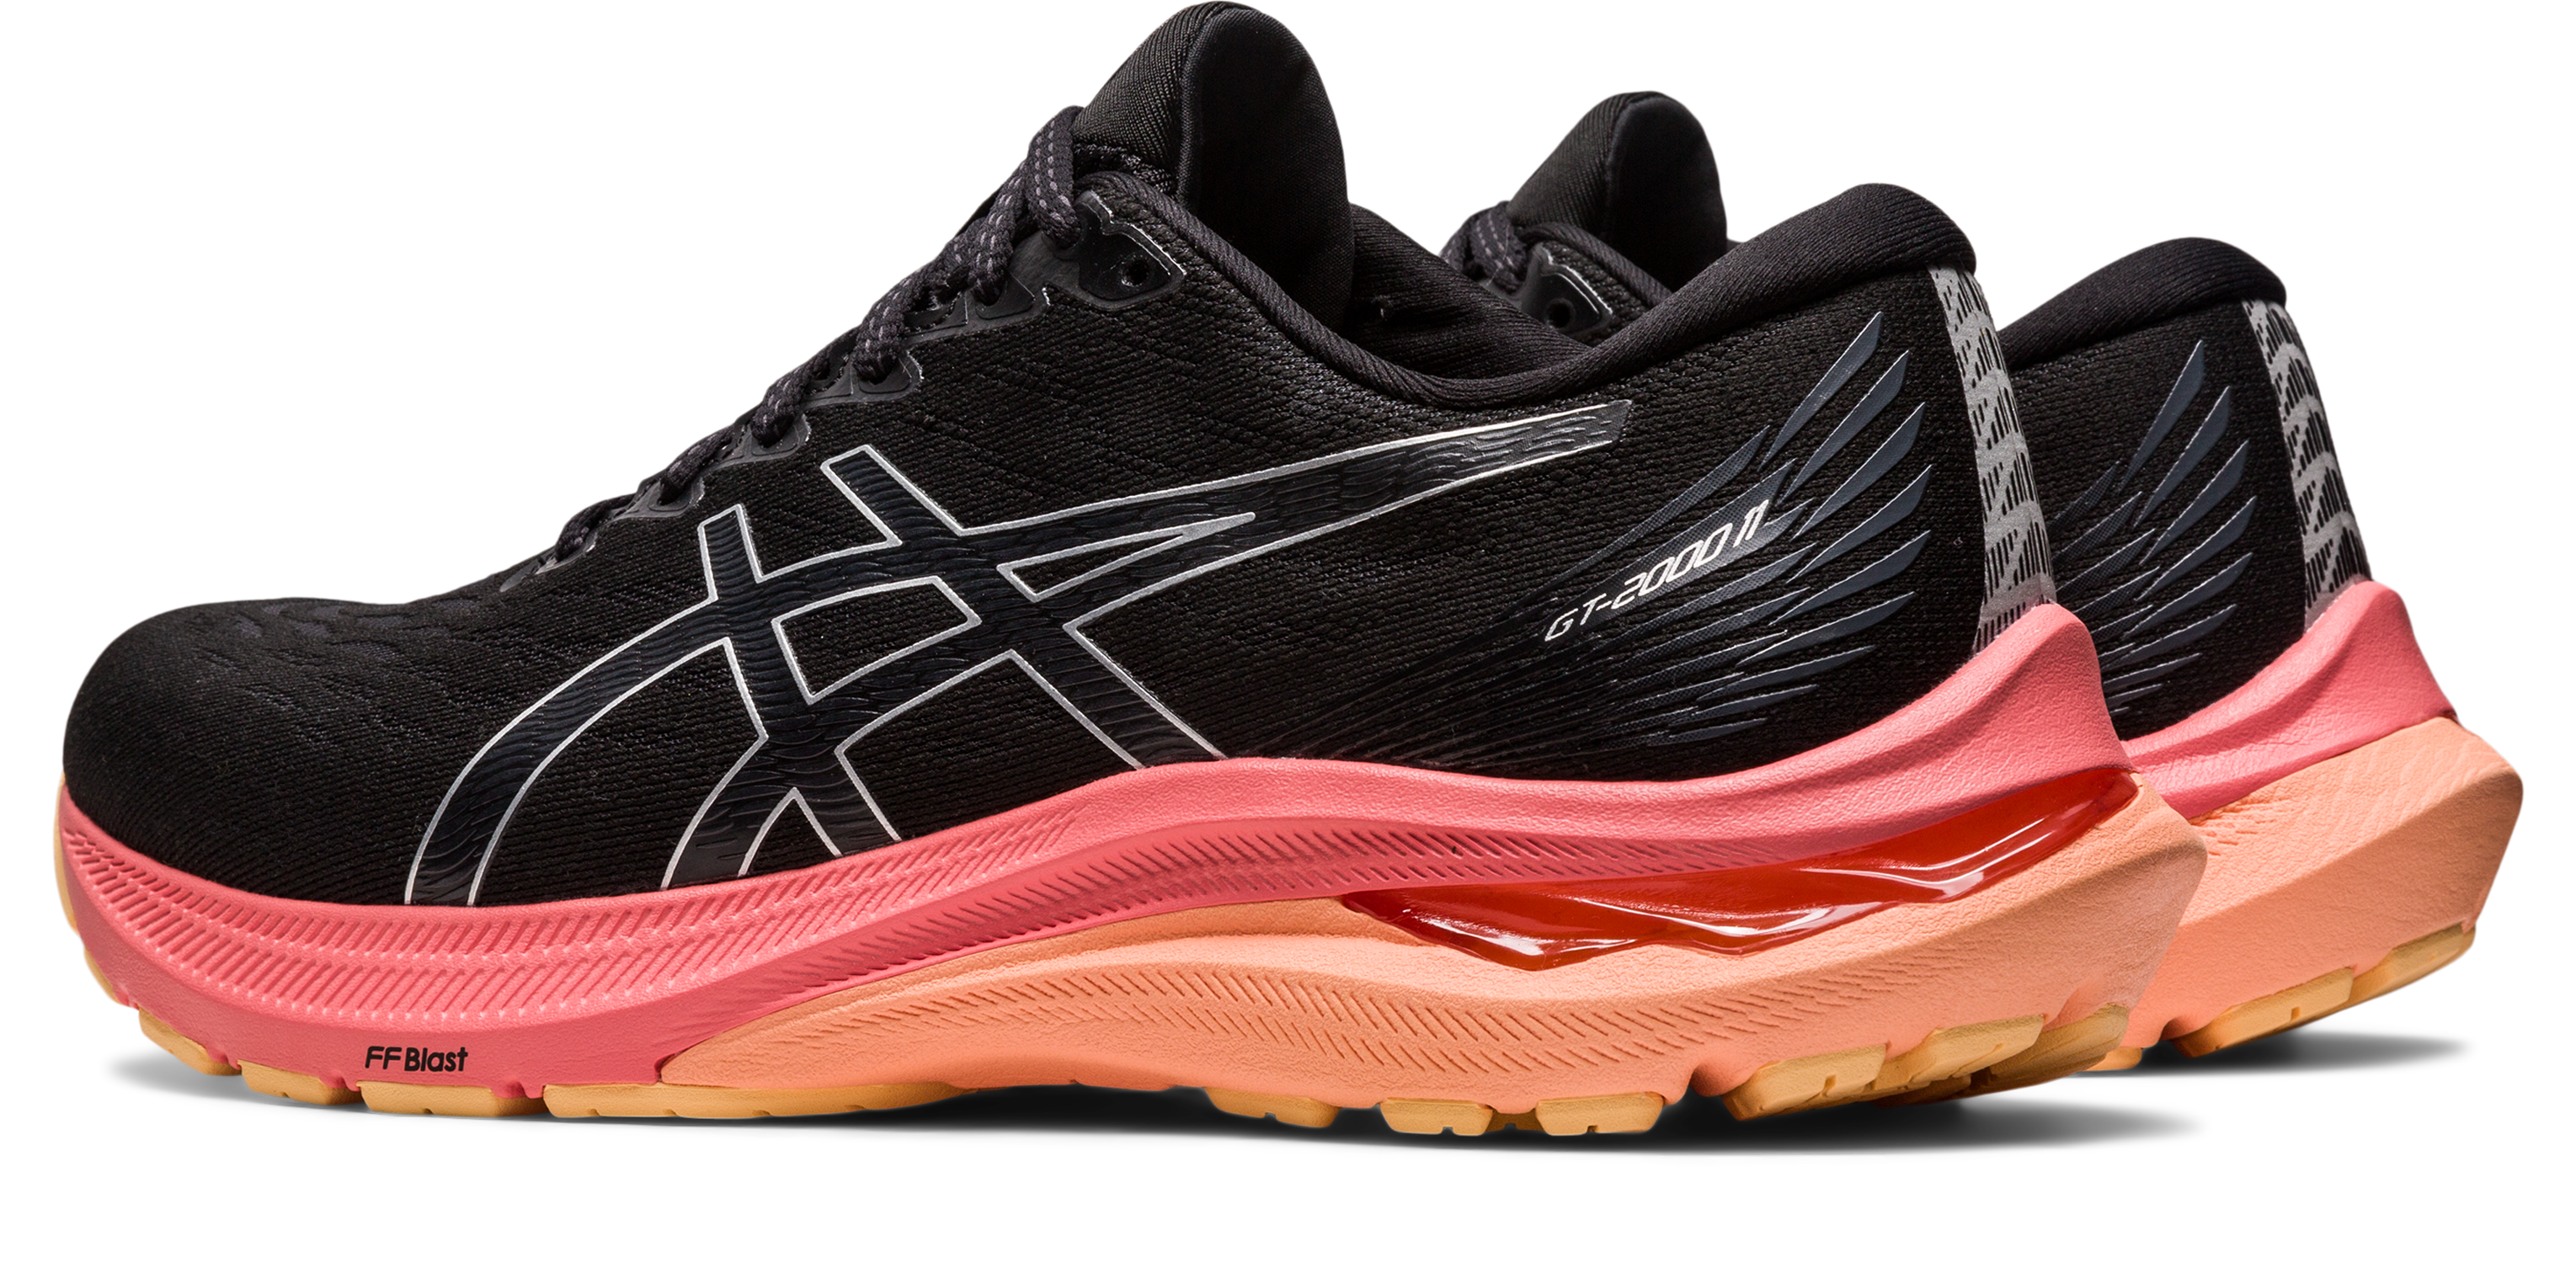 Asics Women's GT-2000 11 Wide (D) Running Shoes in Black/Pure Silver